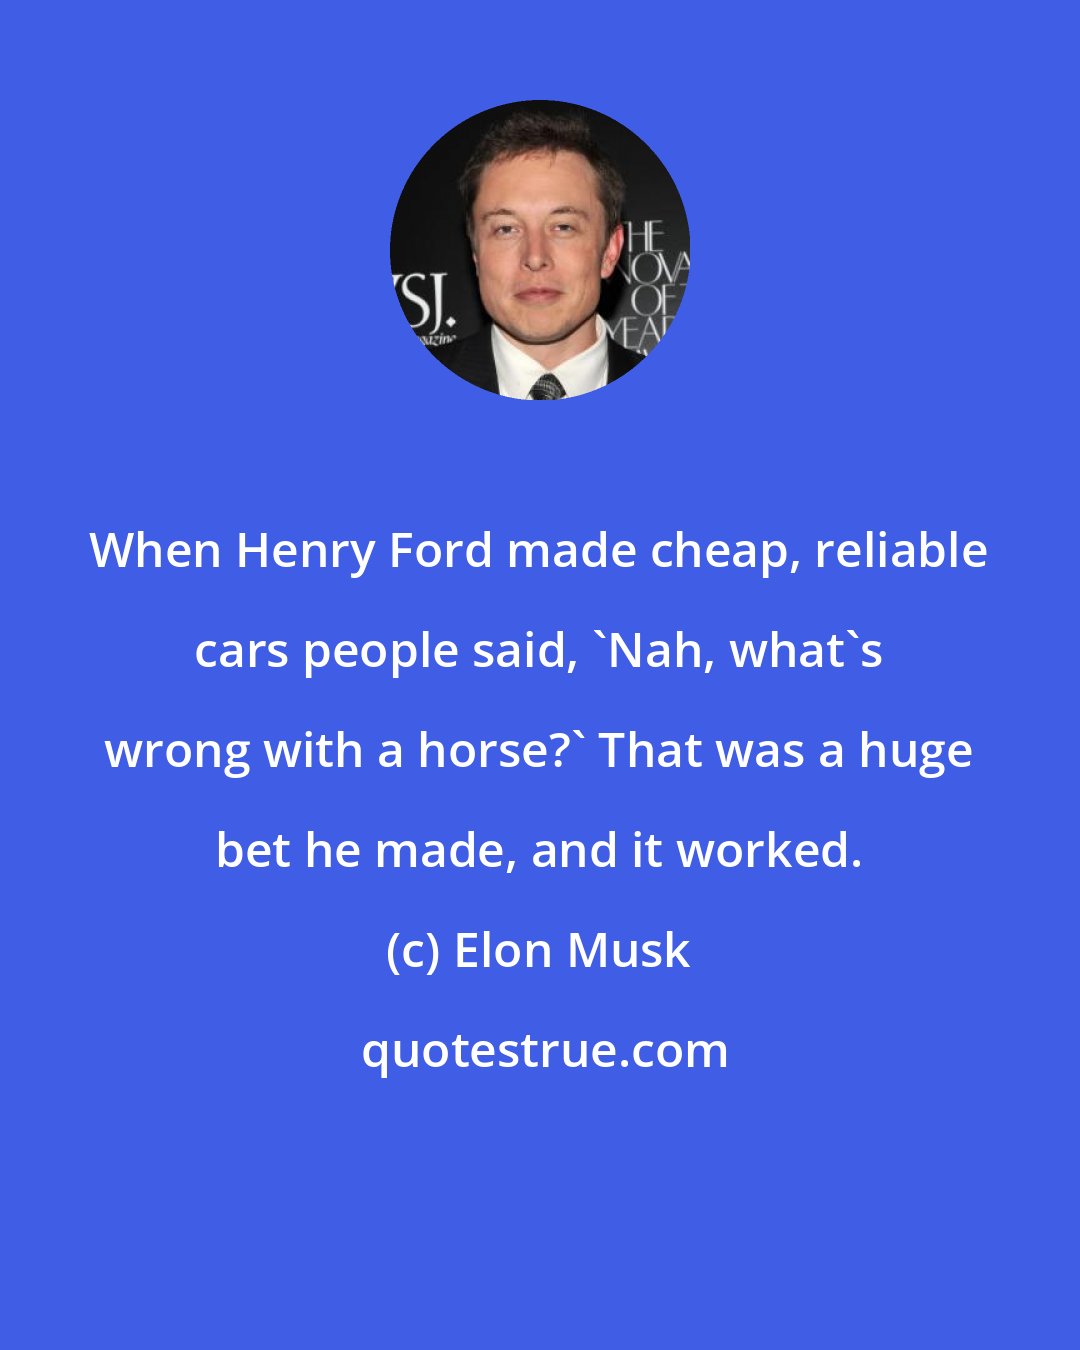 Elon Musk: When Henry Ford made cheap, reliable cars people said, 'Nah, what's wrong with a horse?' That was a huge bet he made, and it worked.